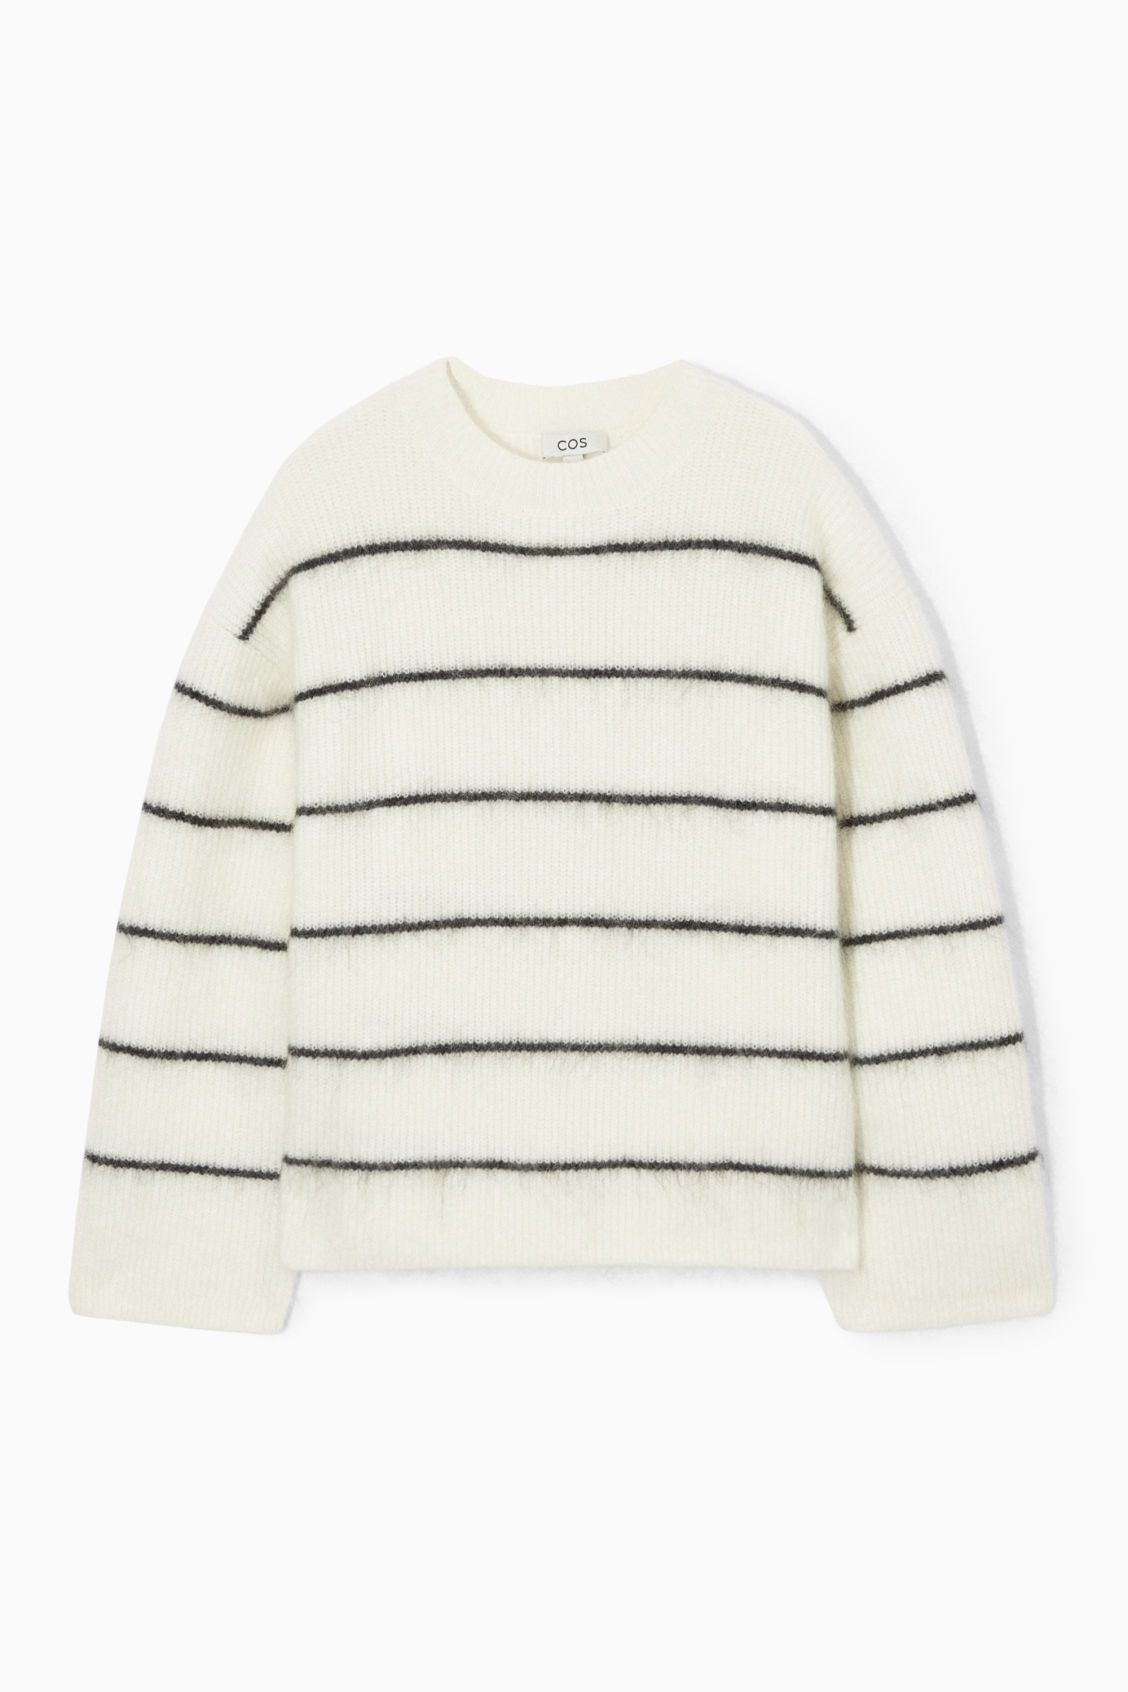 TEXTURED MOHAIR-BLEND JUMPER - WHITE / STRIPED - COS | COS UK